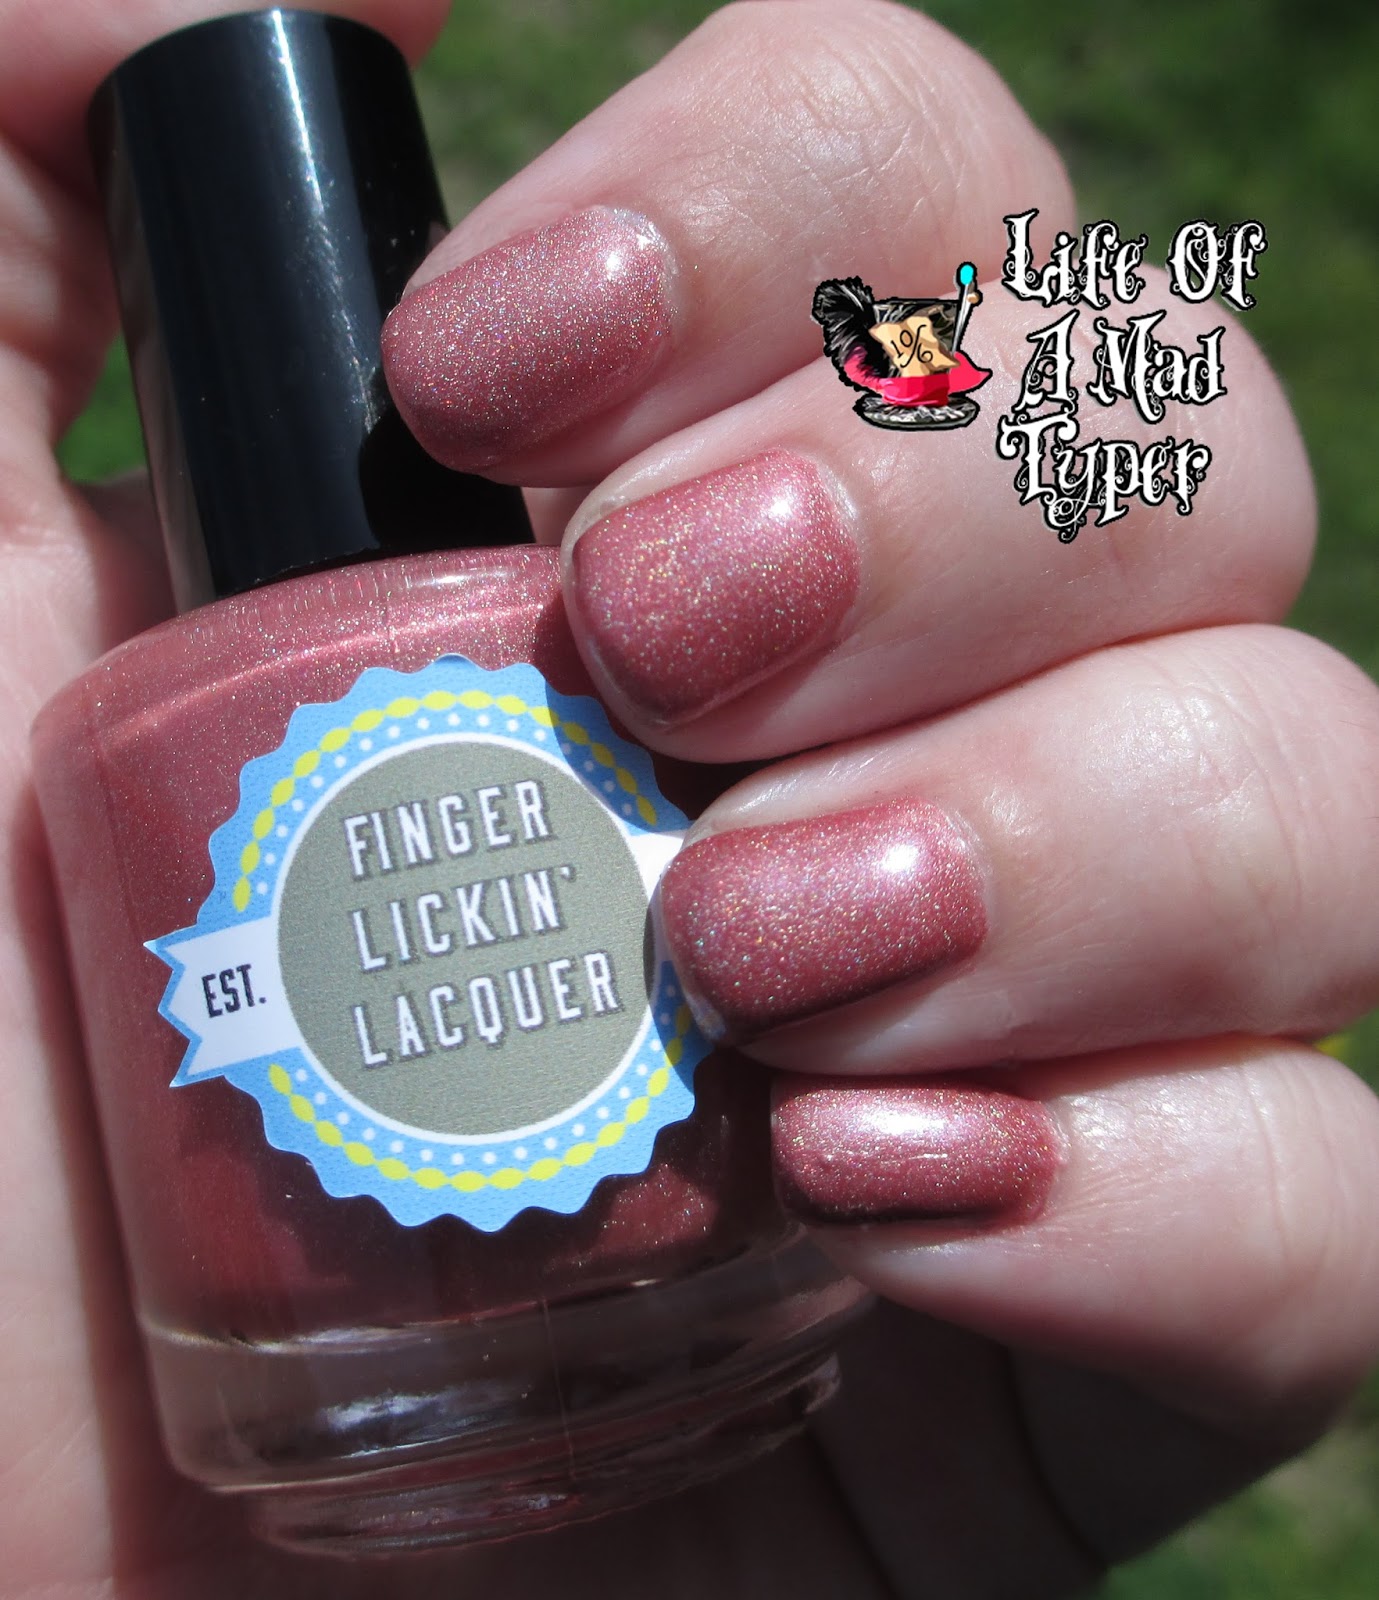 Knight of hell Finger Lickin lacquer